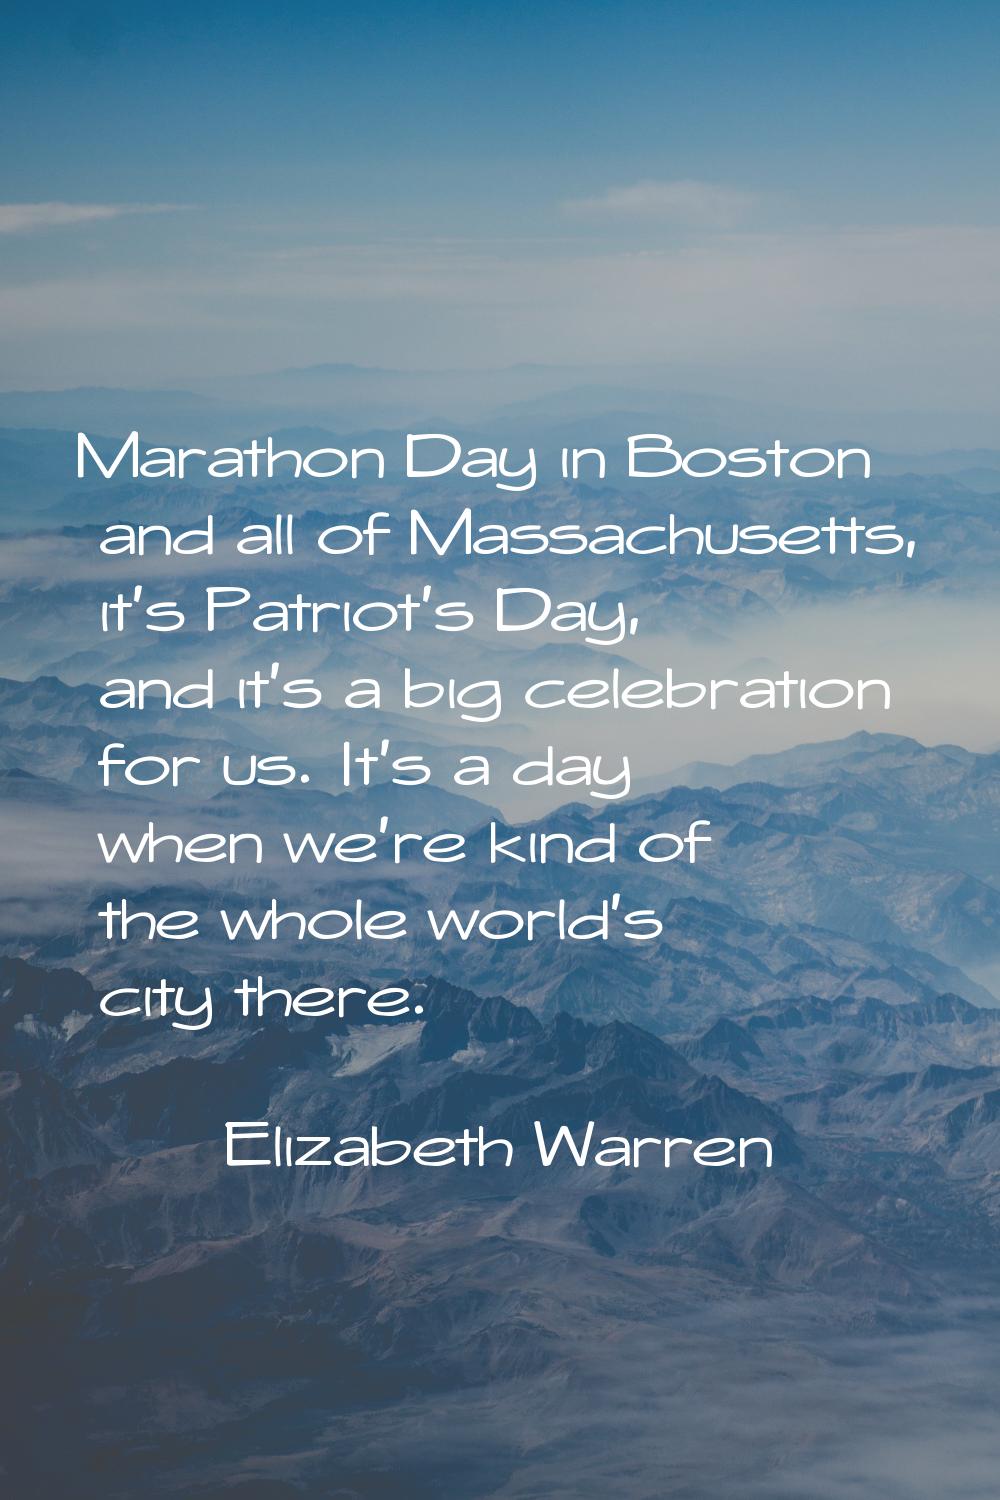 Marathon Day in Boston and all of Massachusetts, it's Patriot's Day, and it's a big celebration for